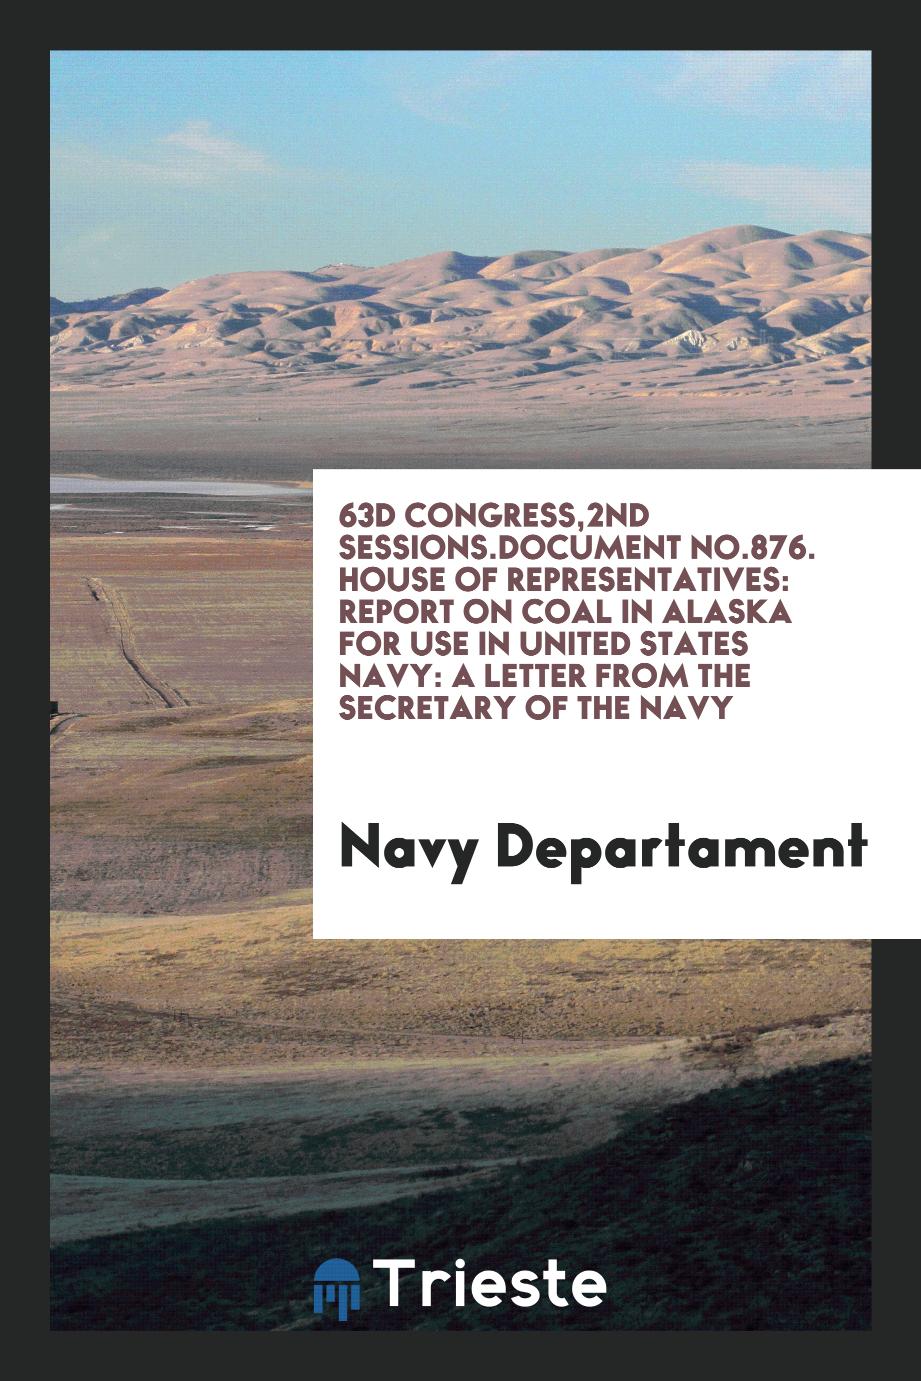 63D Congress,2nd Sessions.Document No.876. House of Representatives: Report on Coal in Alaska for Use in United States Navy: A Letter from the Secretary of the Navy